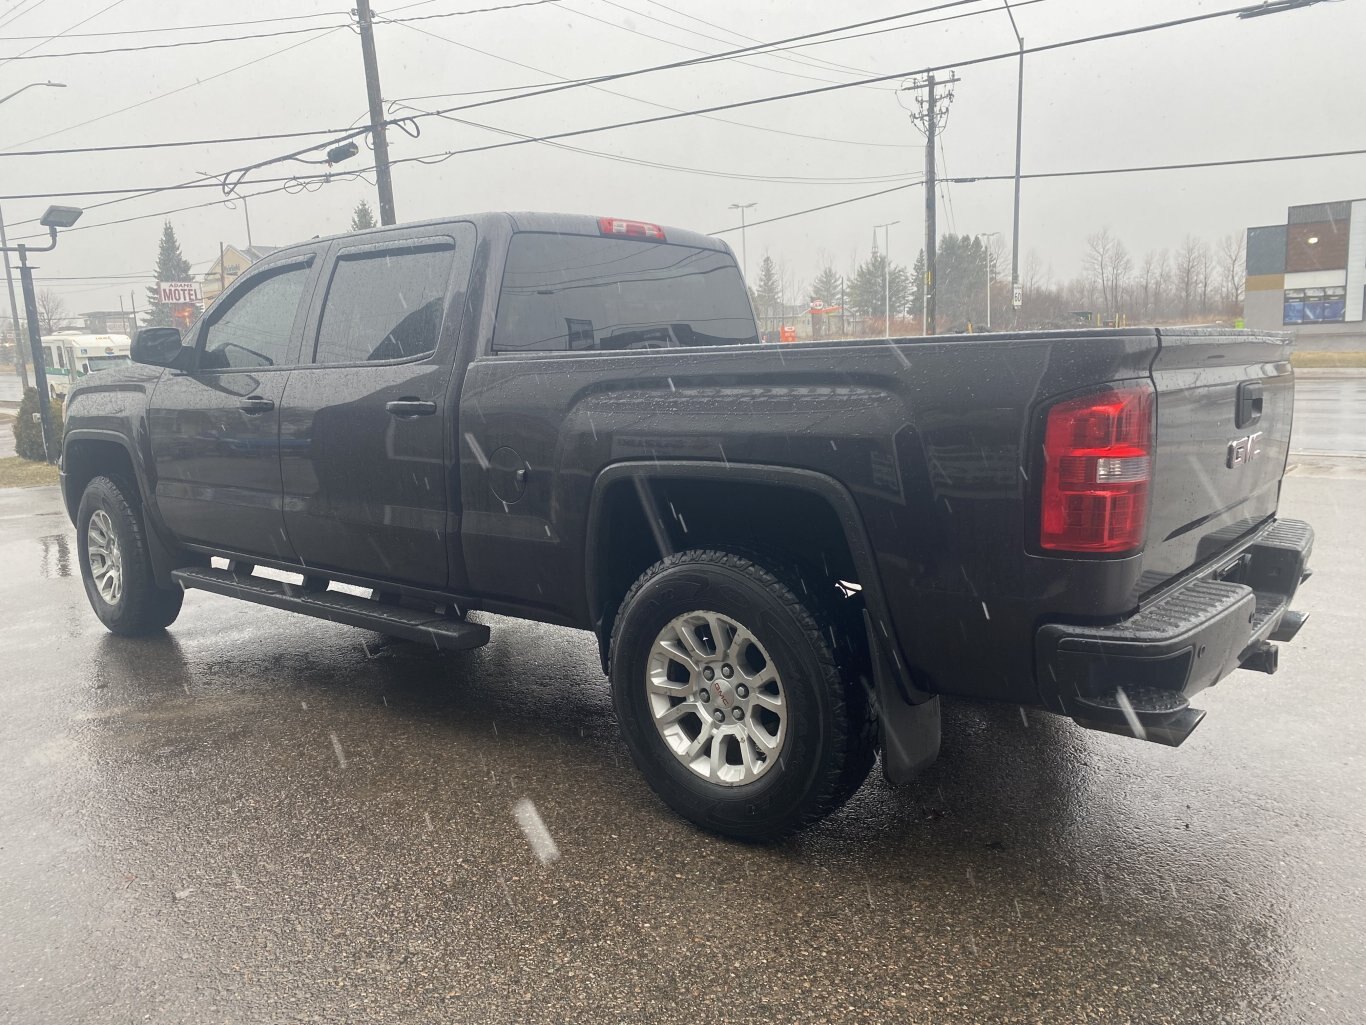 2015 GMC SIERRA SLE 4X4 CREW CAB WITH HEATED SEATS, REAR VIEW CAMERA AND ONSTAR NAV!!